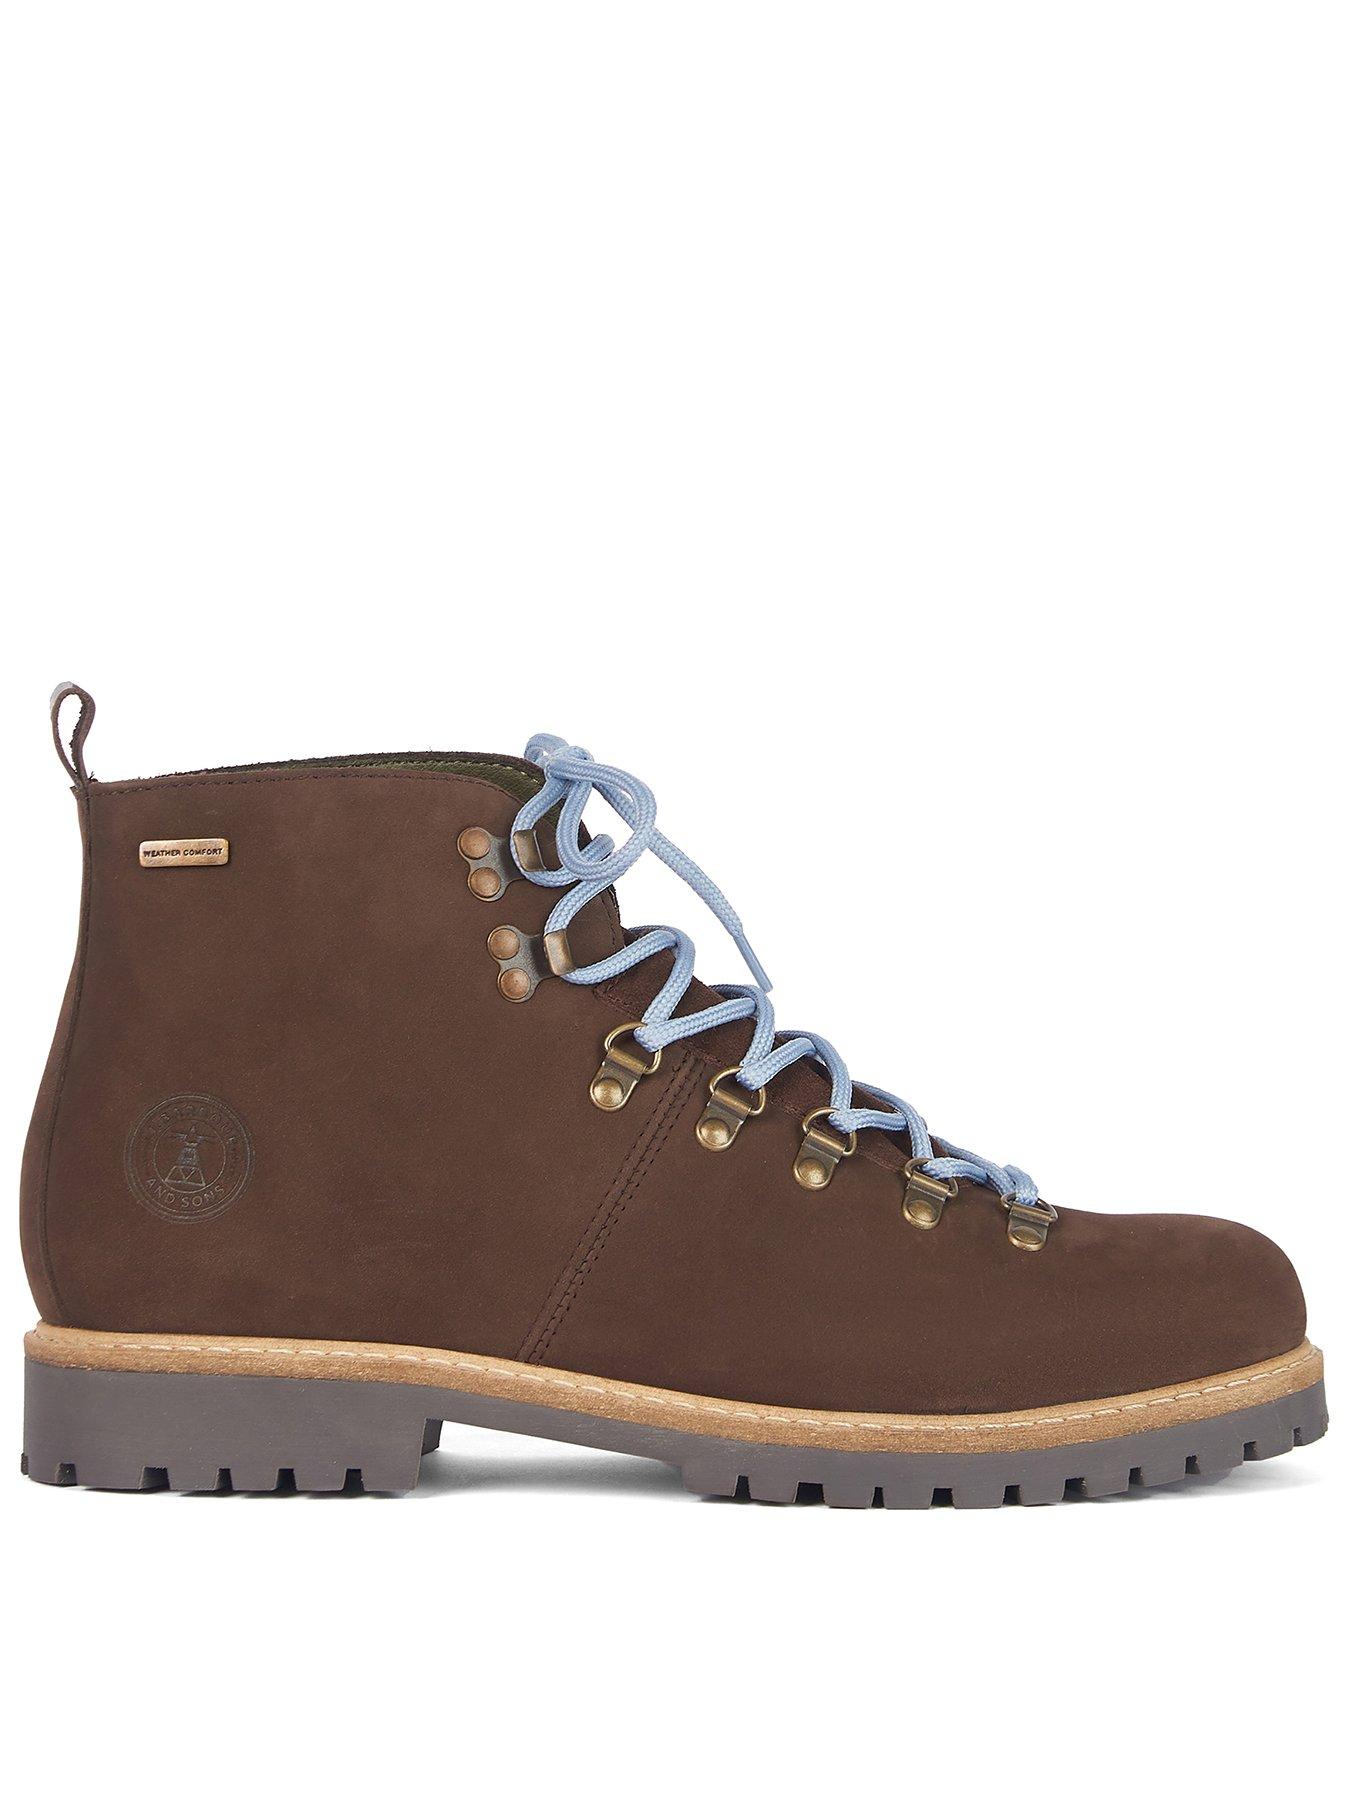 Wainwright Leather Boots - Brown